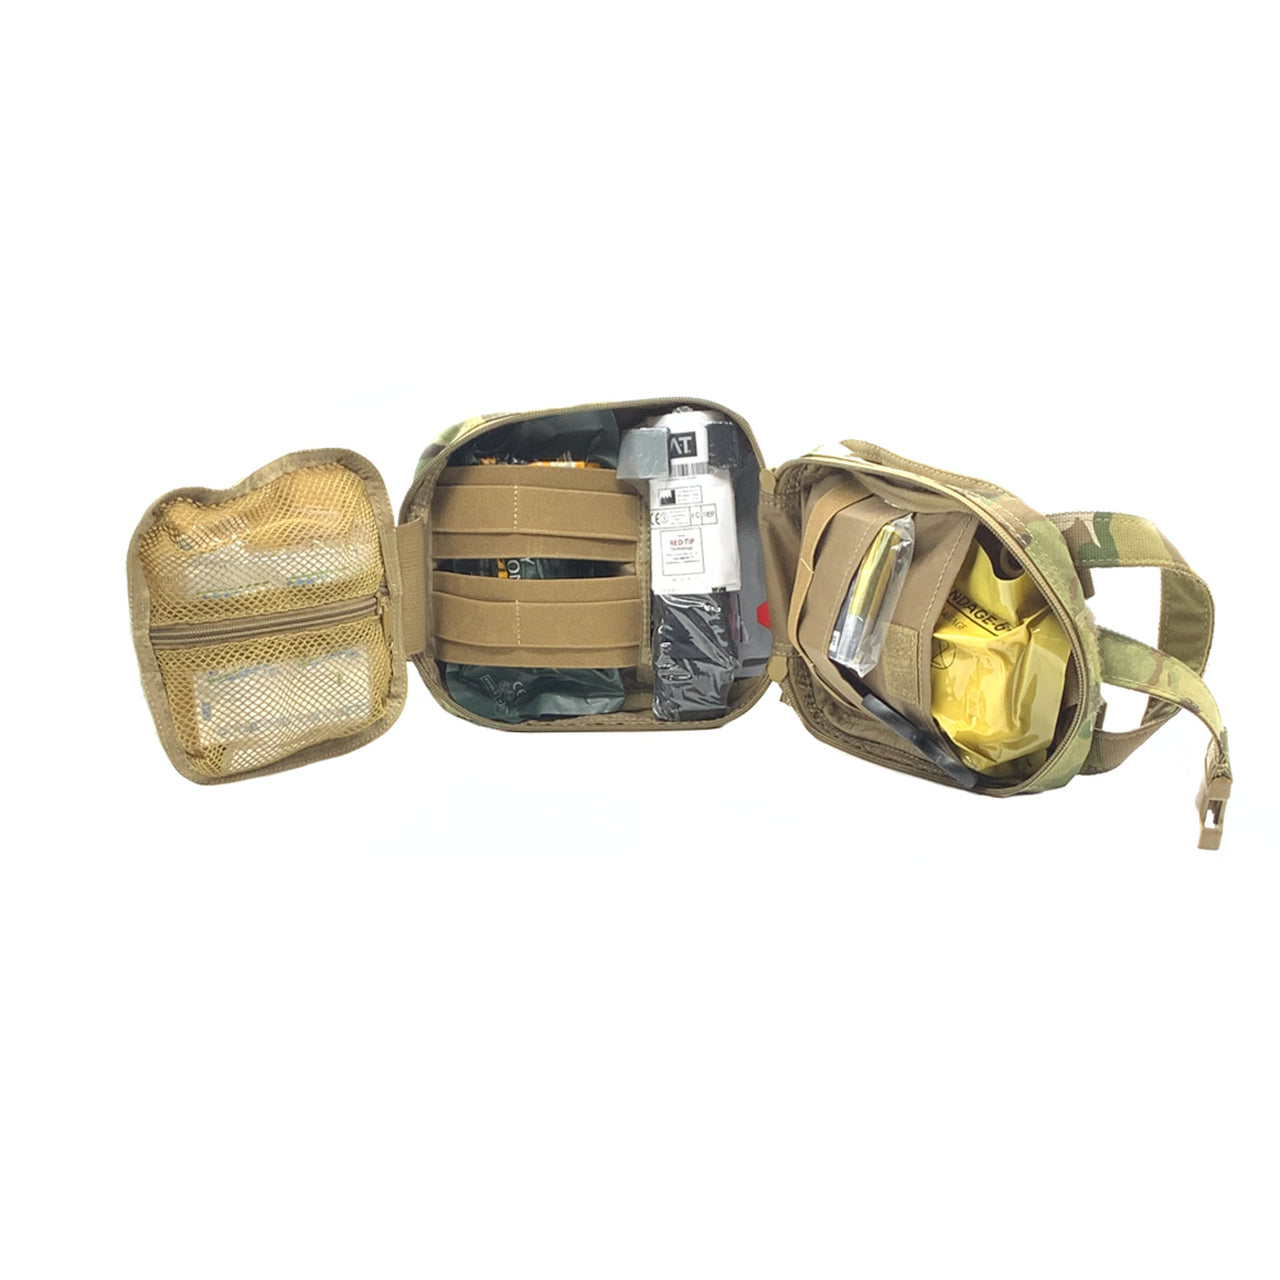 A Shellback Tactical Rip Away Medic Pouch with several items in it.